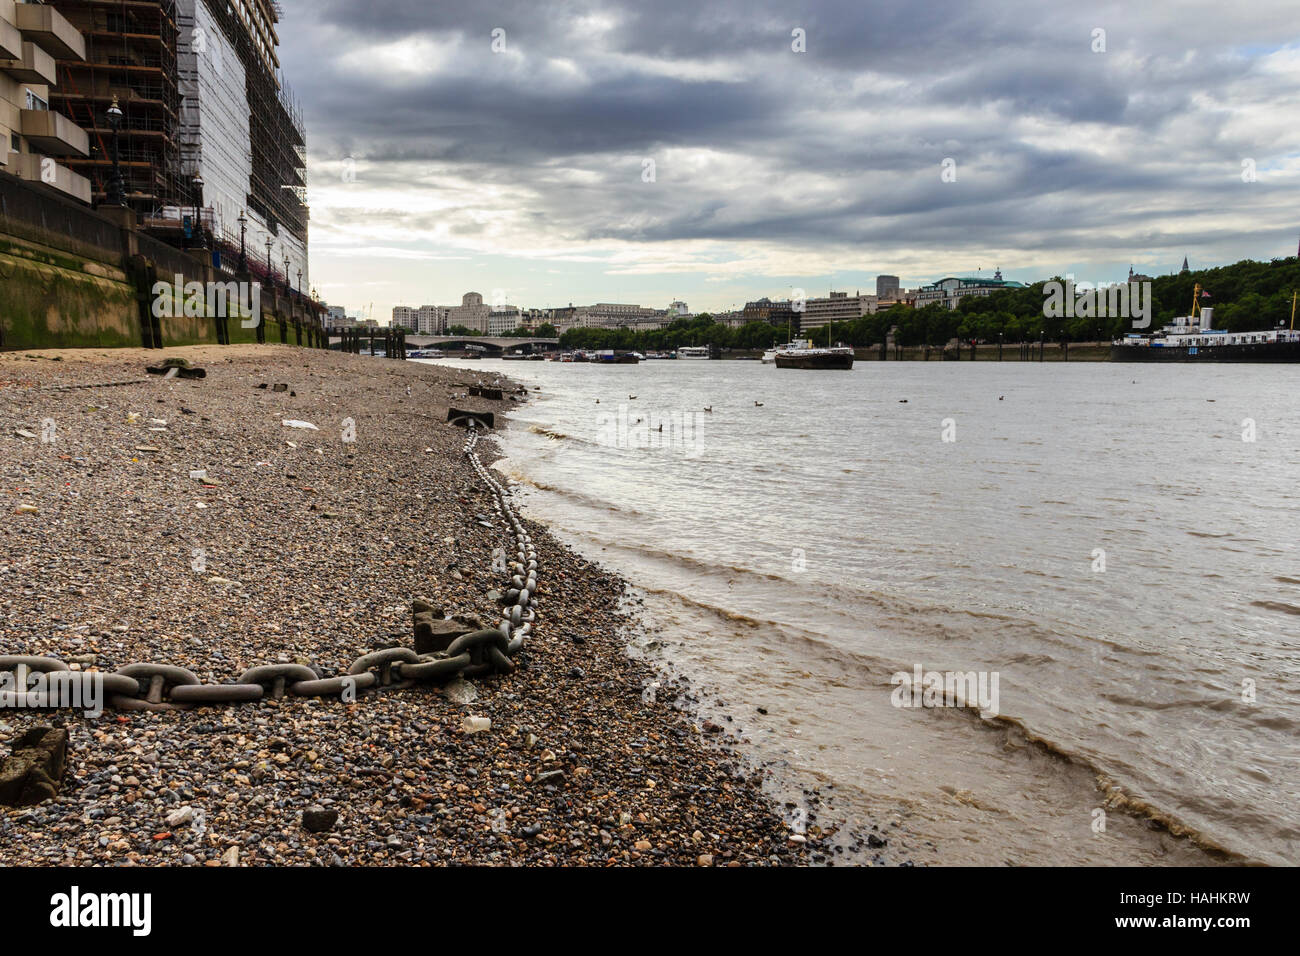 An anchor chain snaking along the stony south shore of the River Thames at Blackfriars, London, UK looking upriver, storm clouds looming overhead Stock Photo